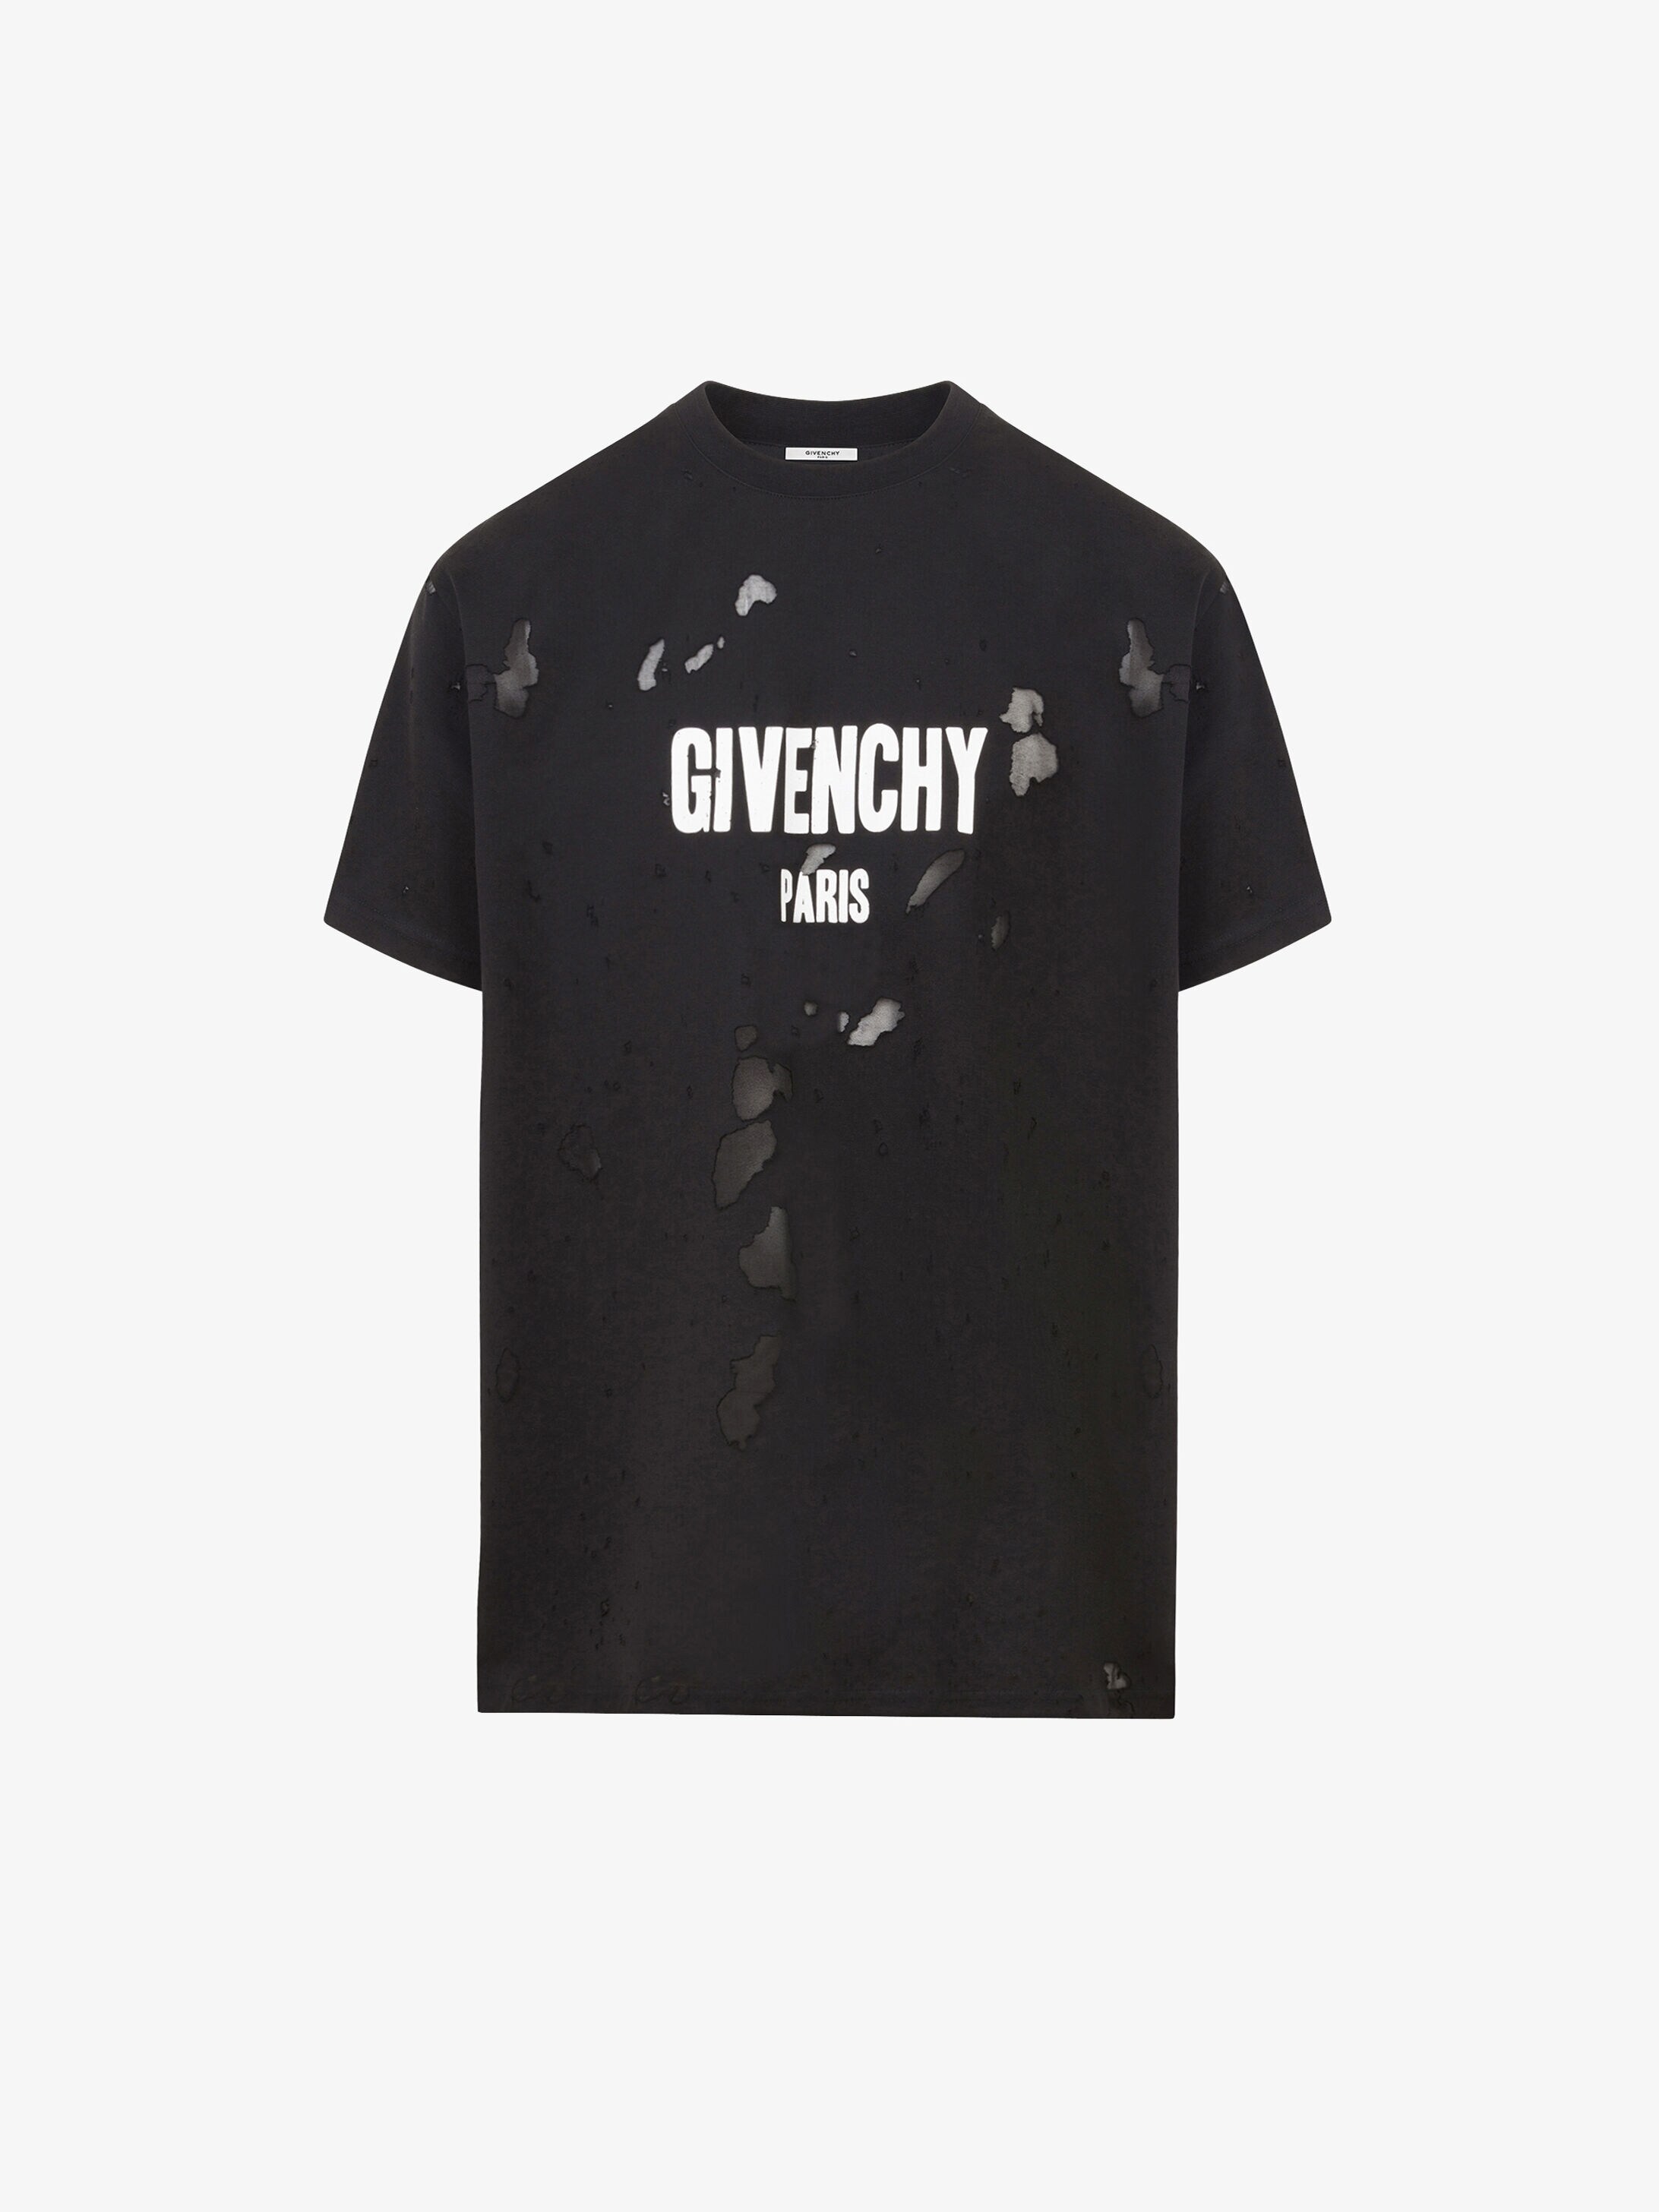 givenchy distressed t shirt red